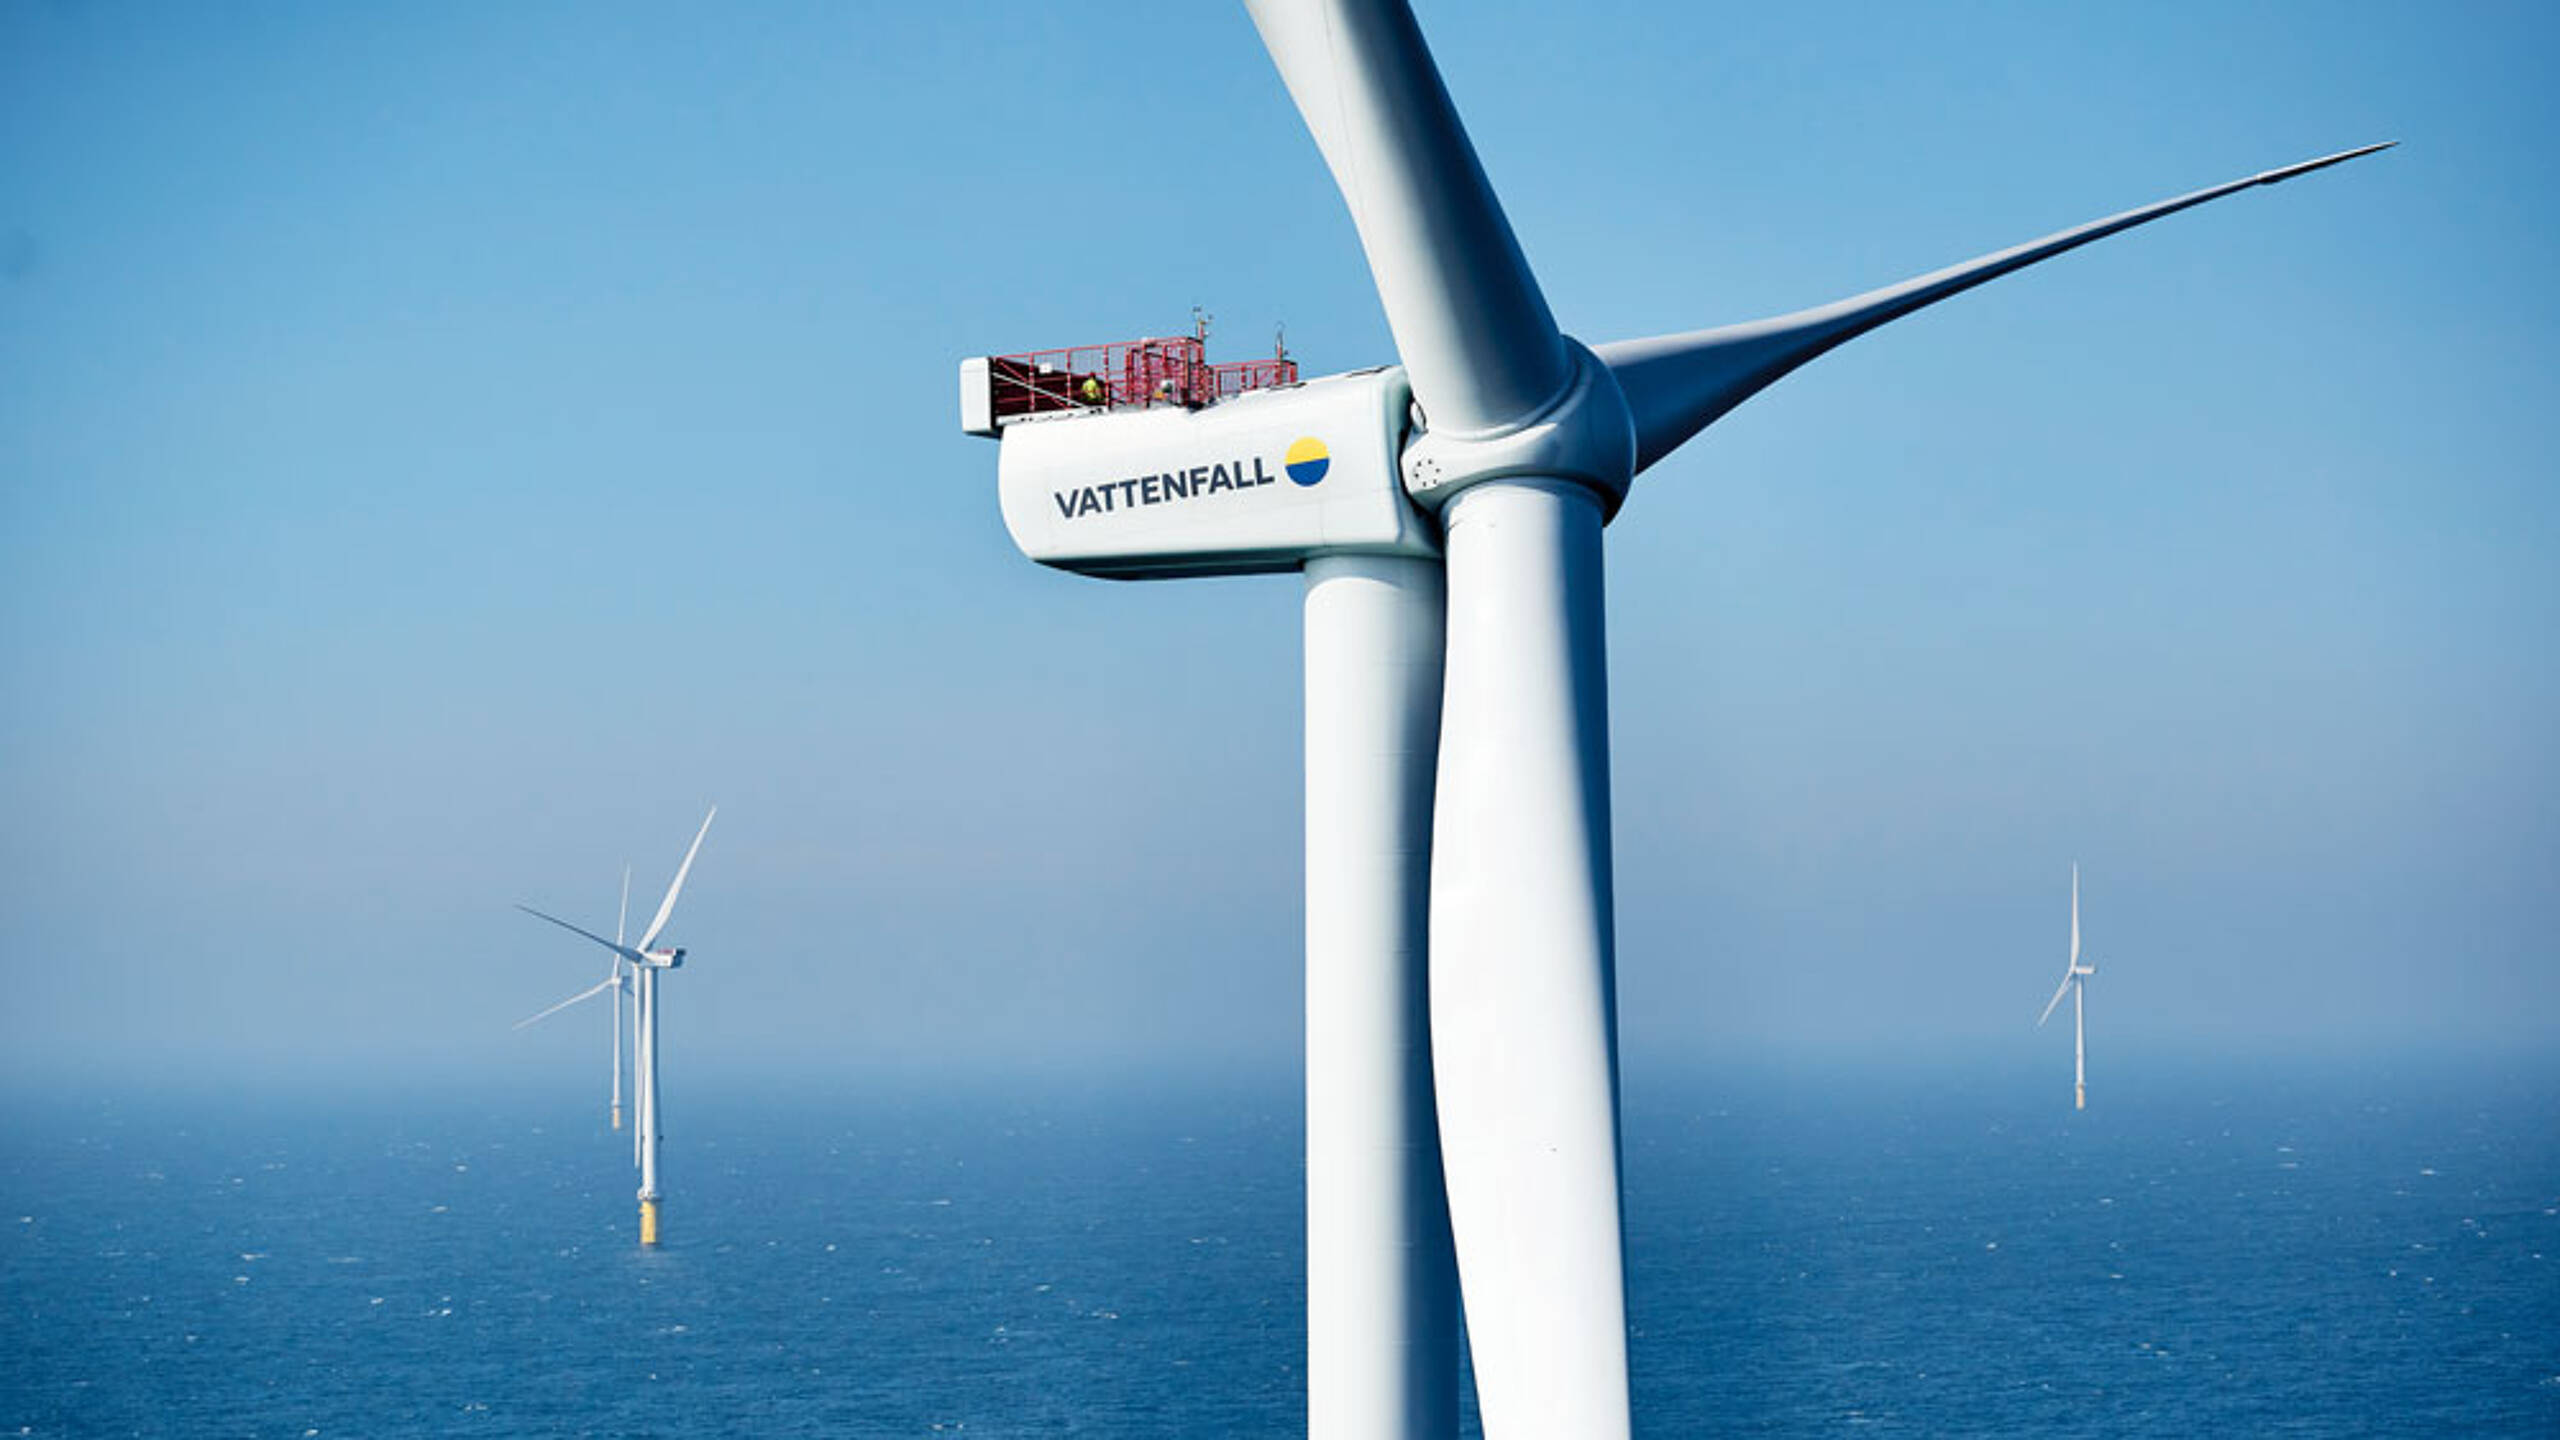 UK boosts offshore wind strike price by two-thirds after crisis talks with renewables industry